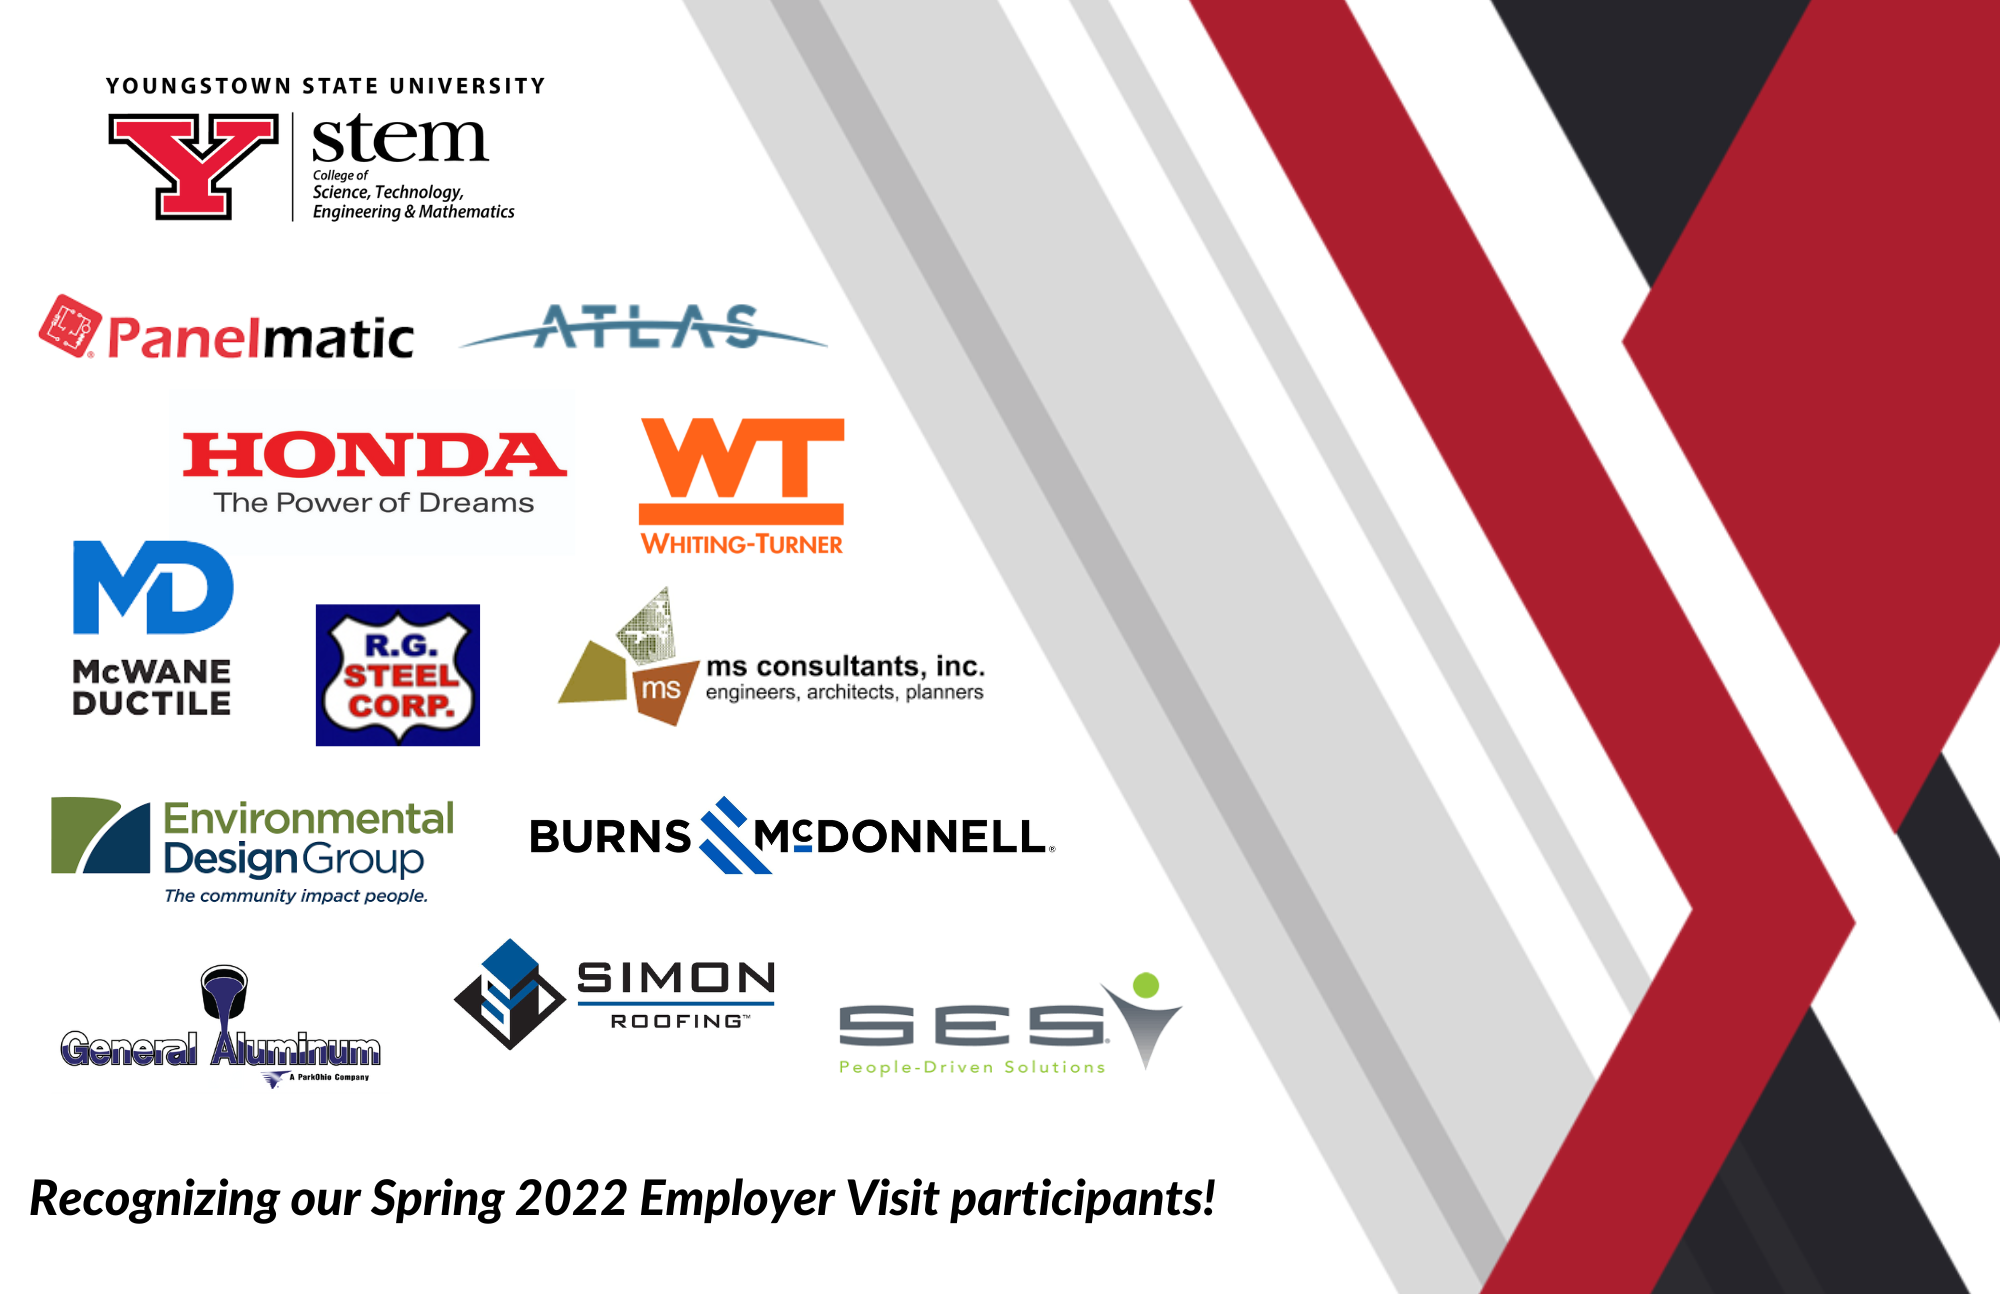 List of companies who visited YSU STEM in Spring 2022